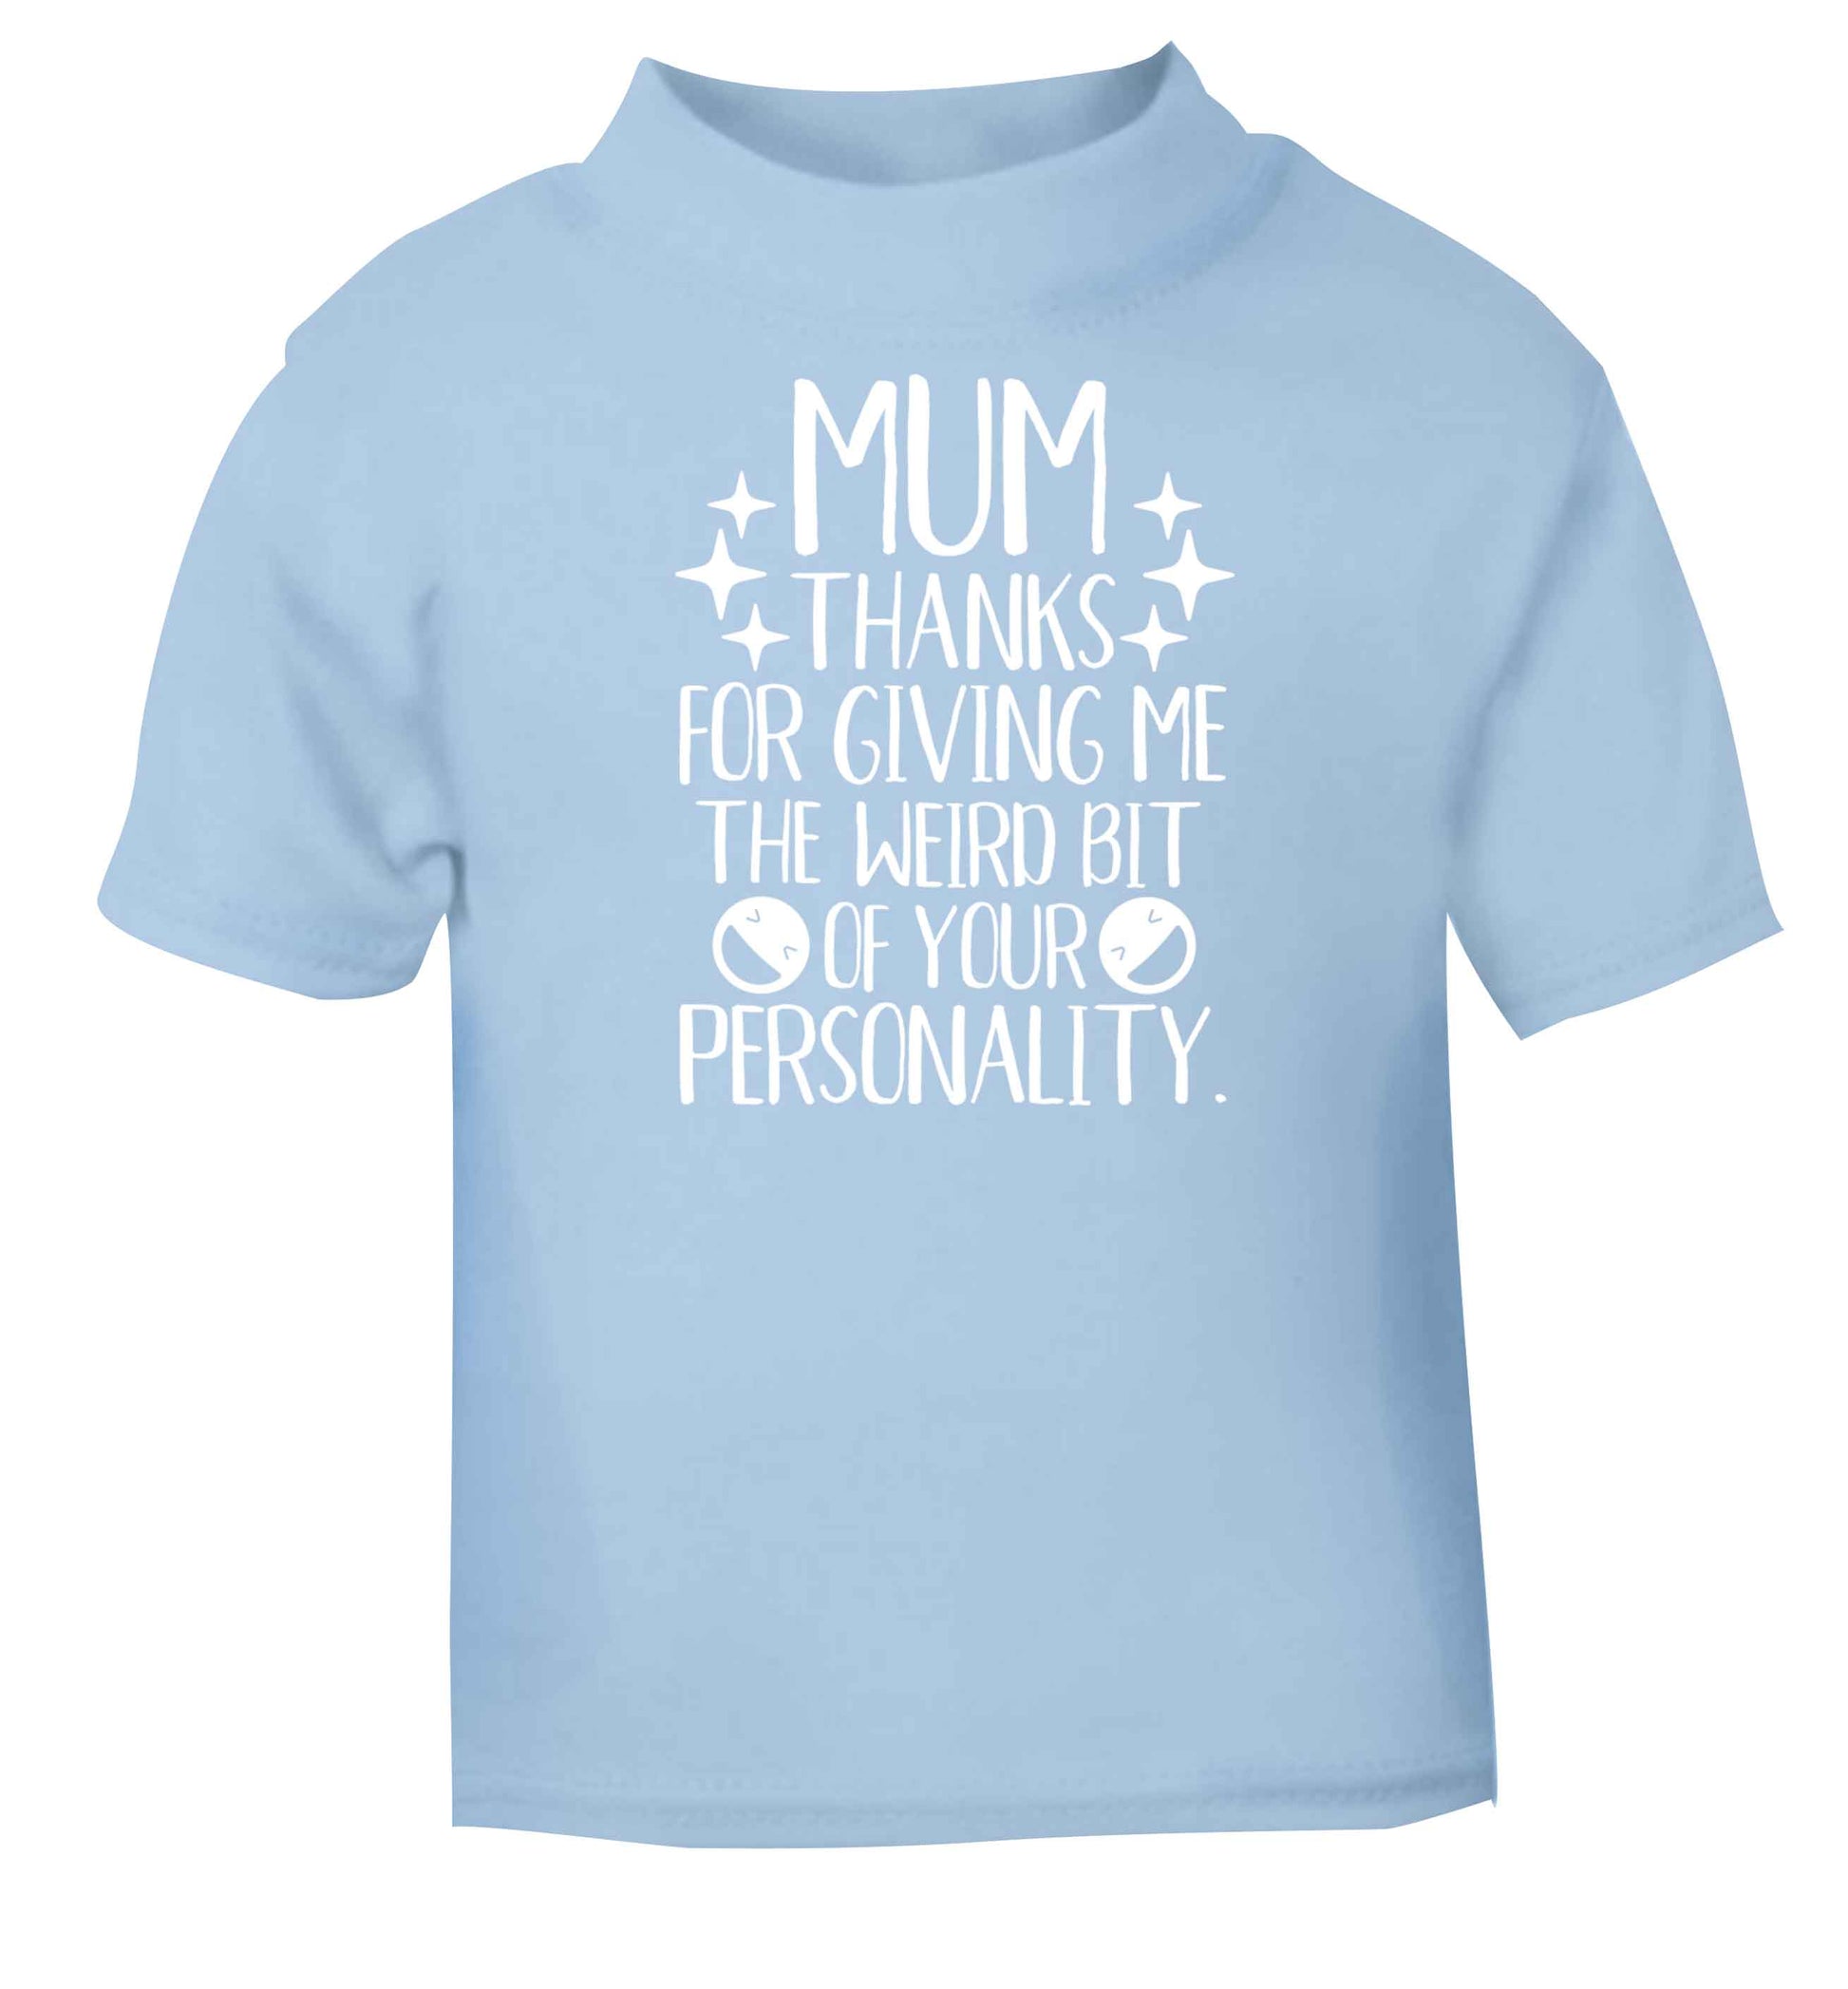 Mum thanks for giving me the weird bit of your personality light blue baby toddler Tshirt 2 Years